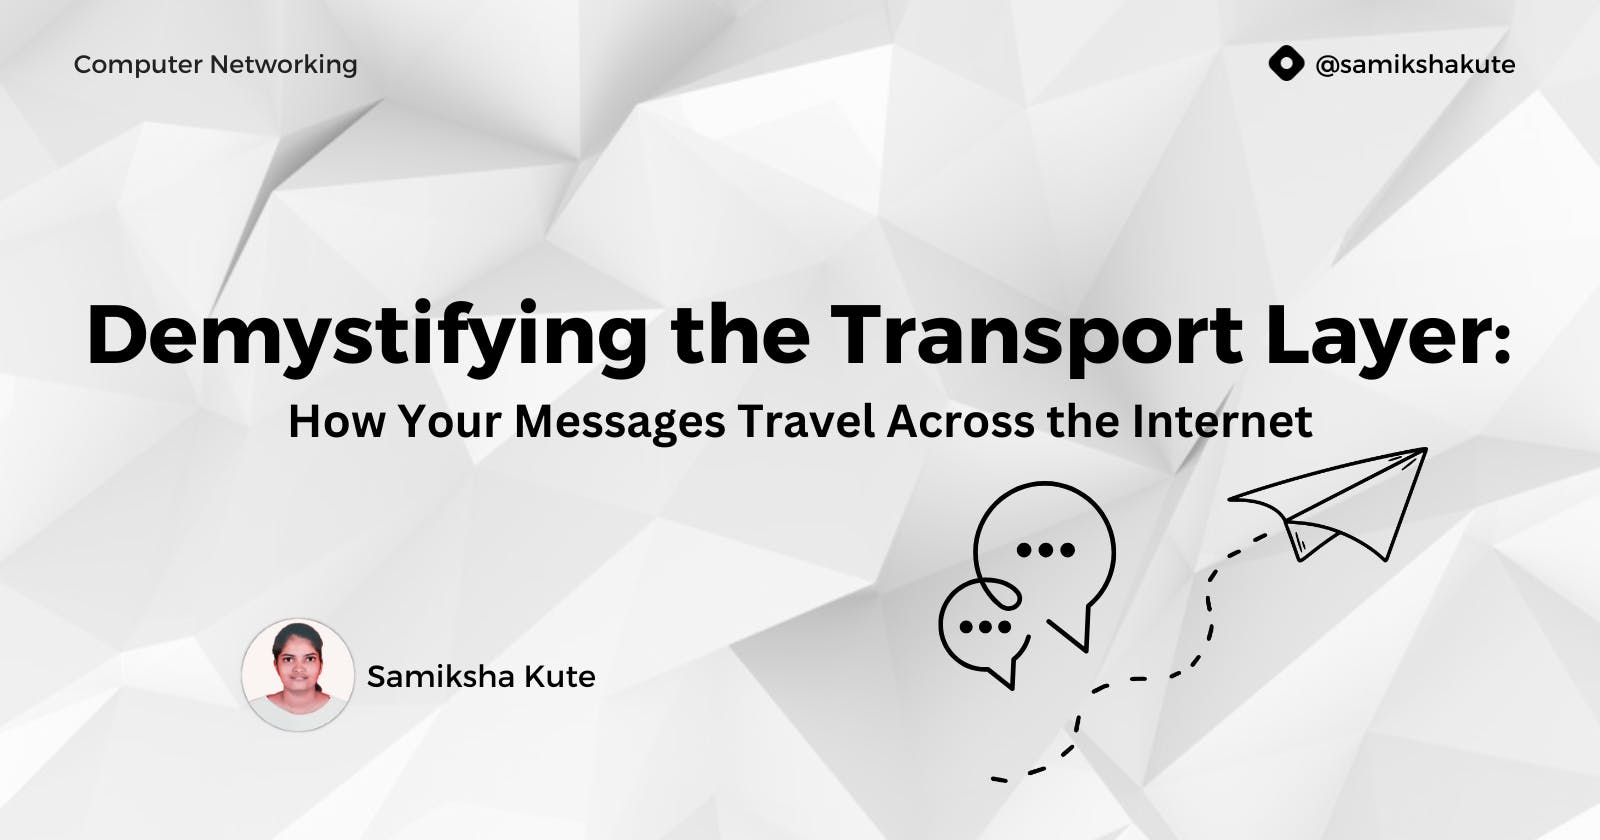 Demystifying the Transport Layer: How Your Messages Travel Across the Internet